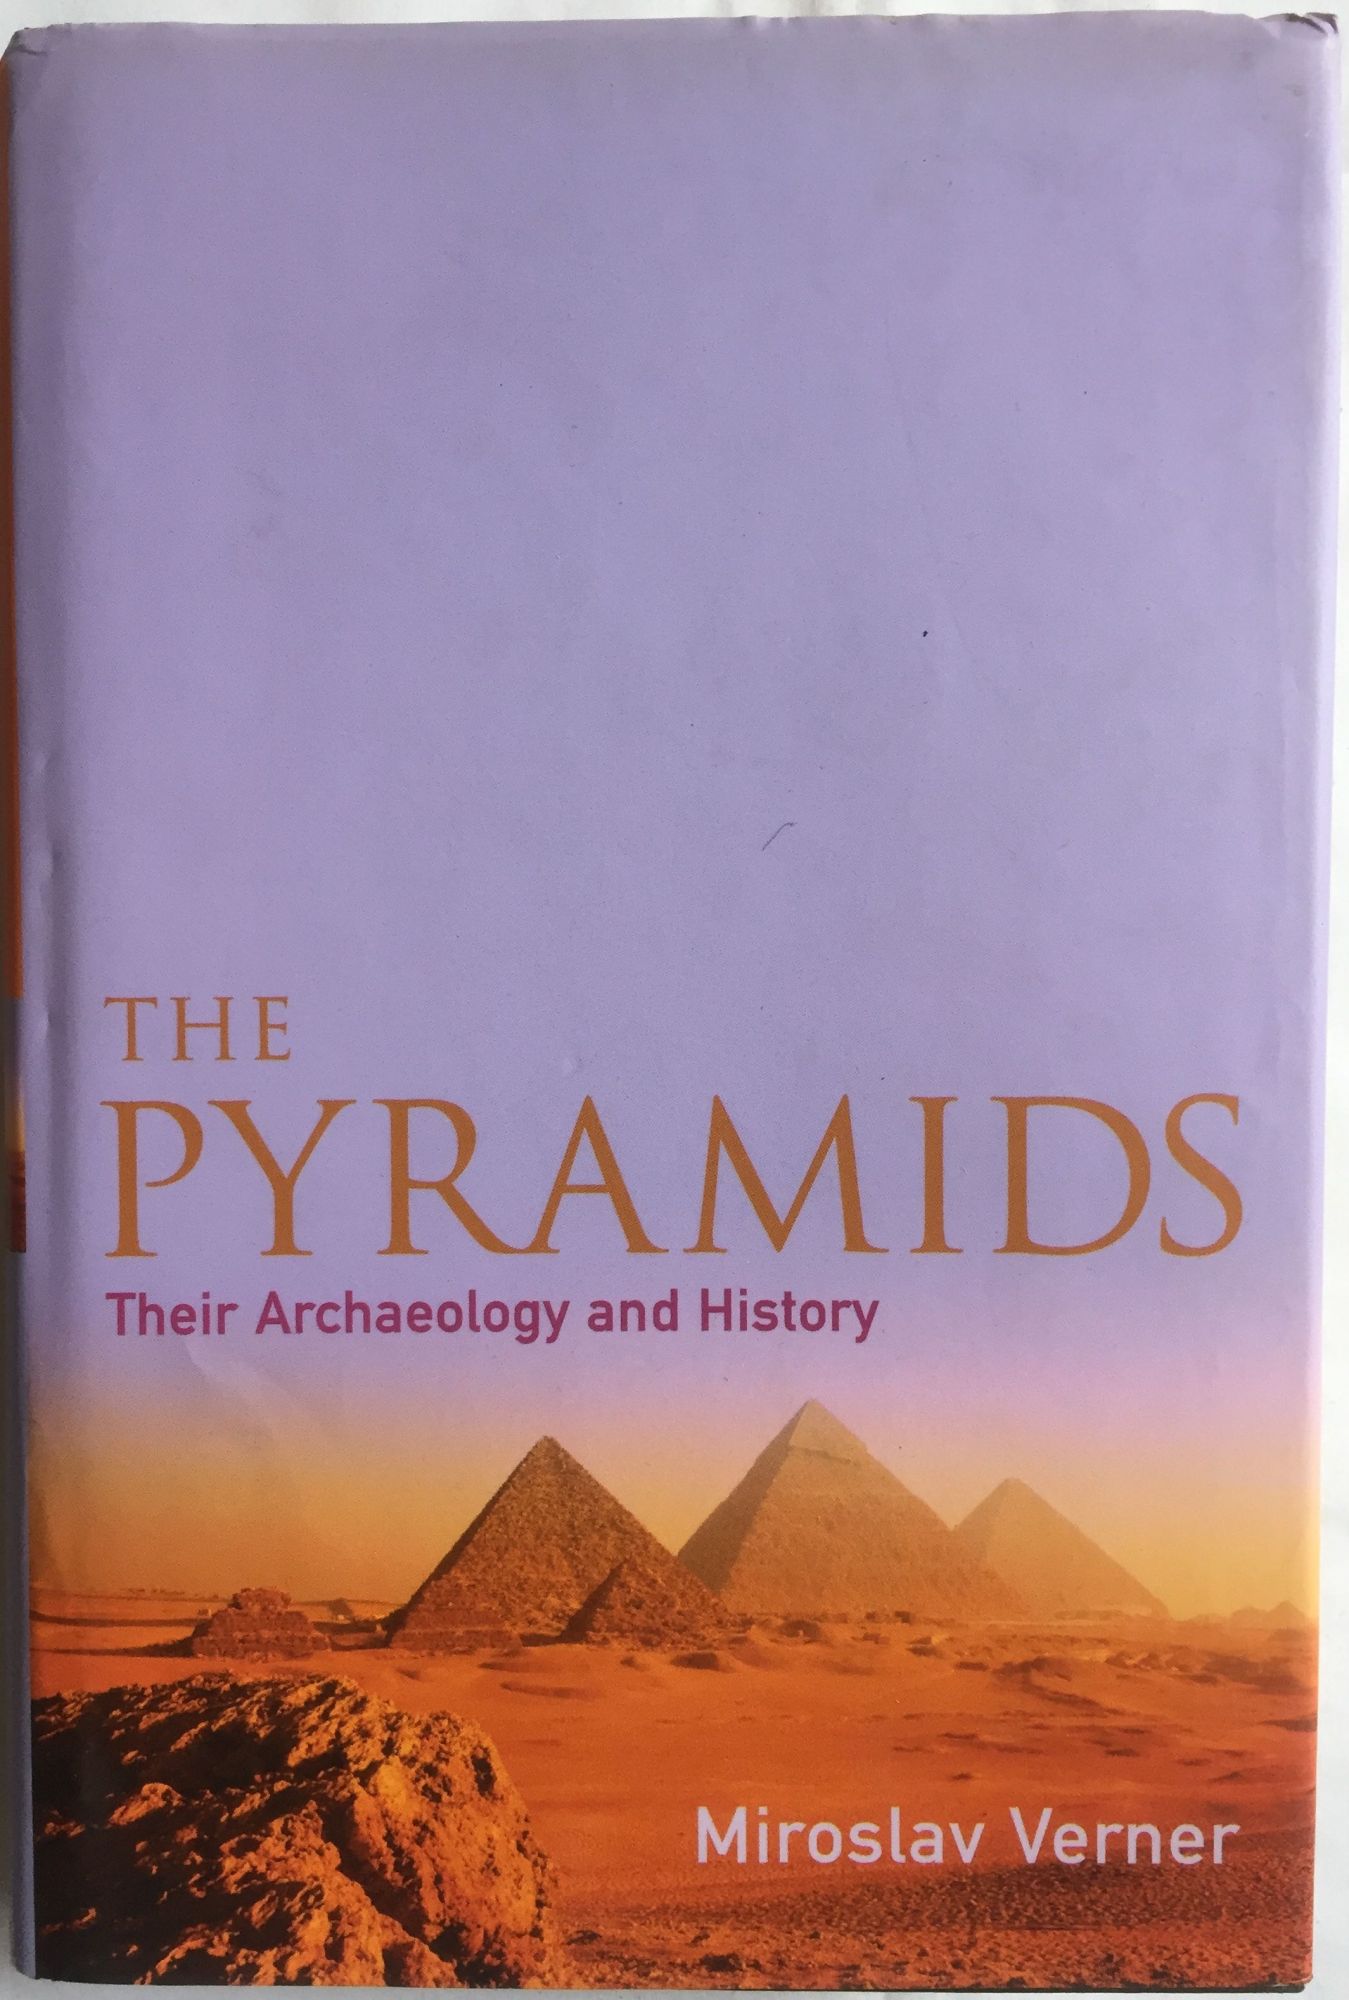 THE PYRAMIDS: Their Archaeology and History.